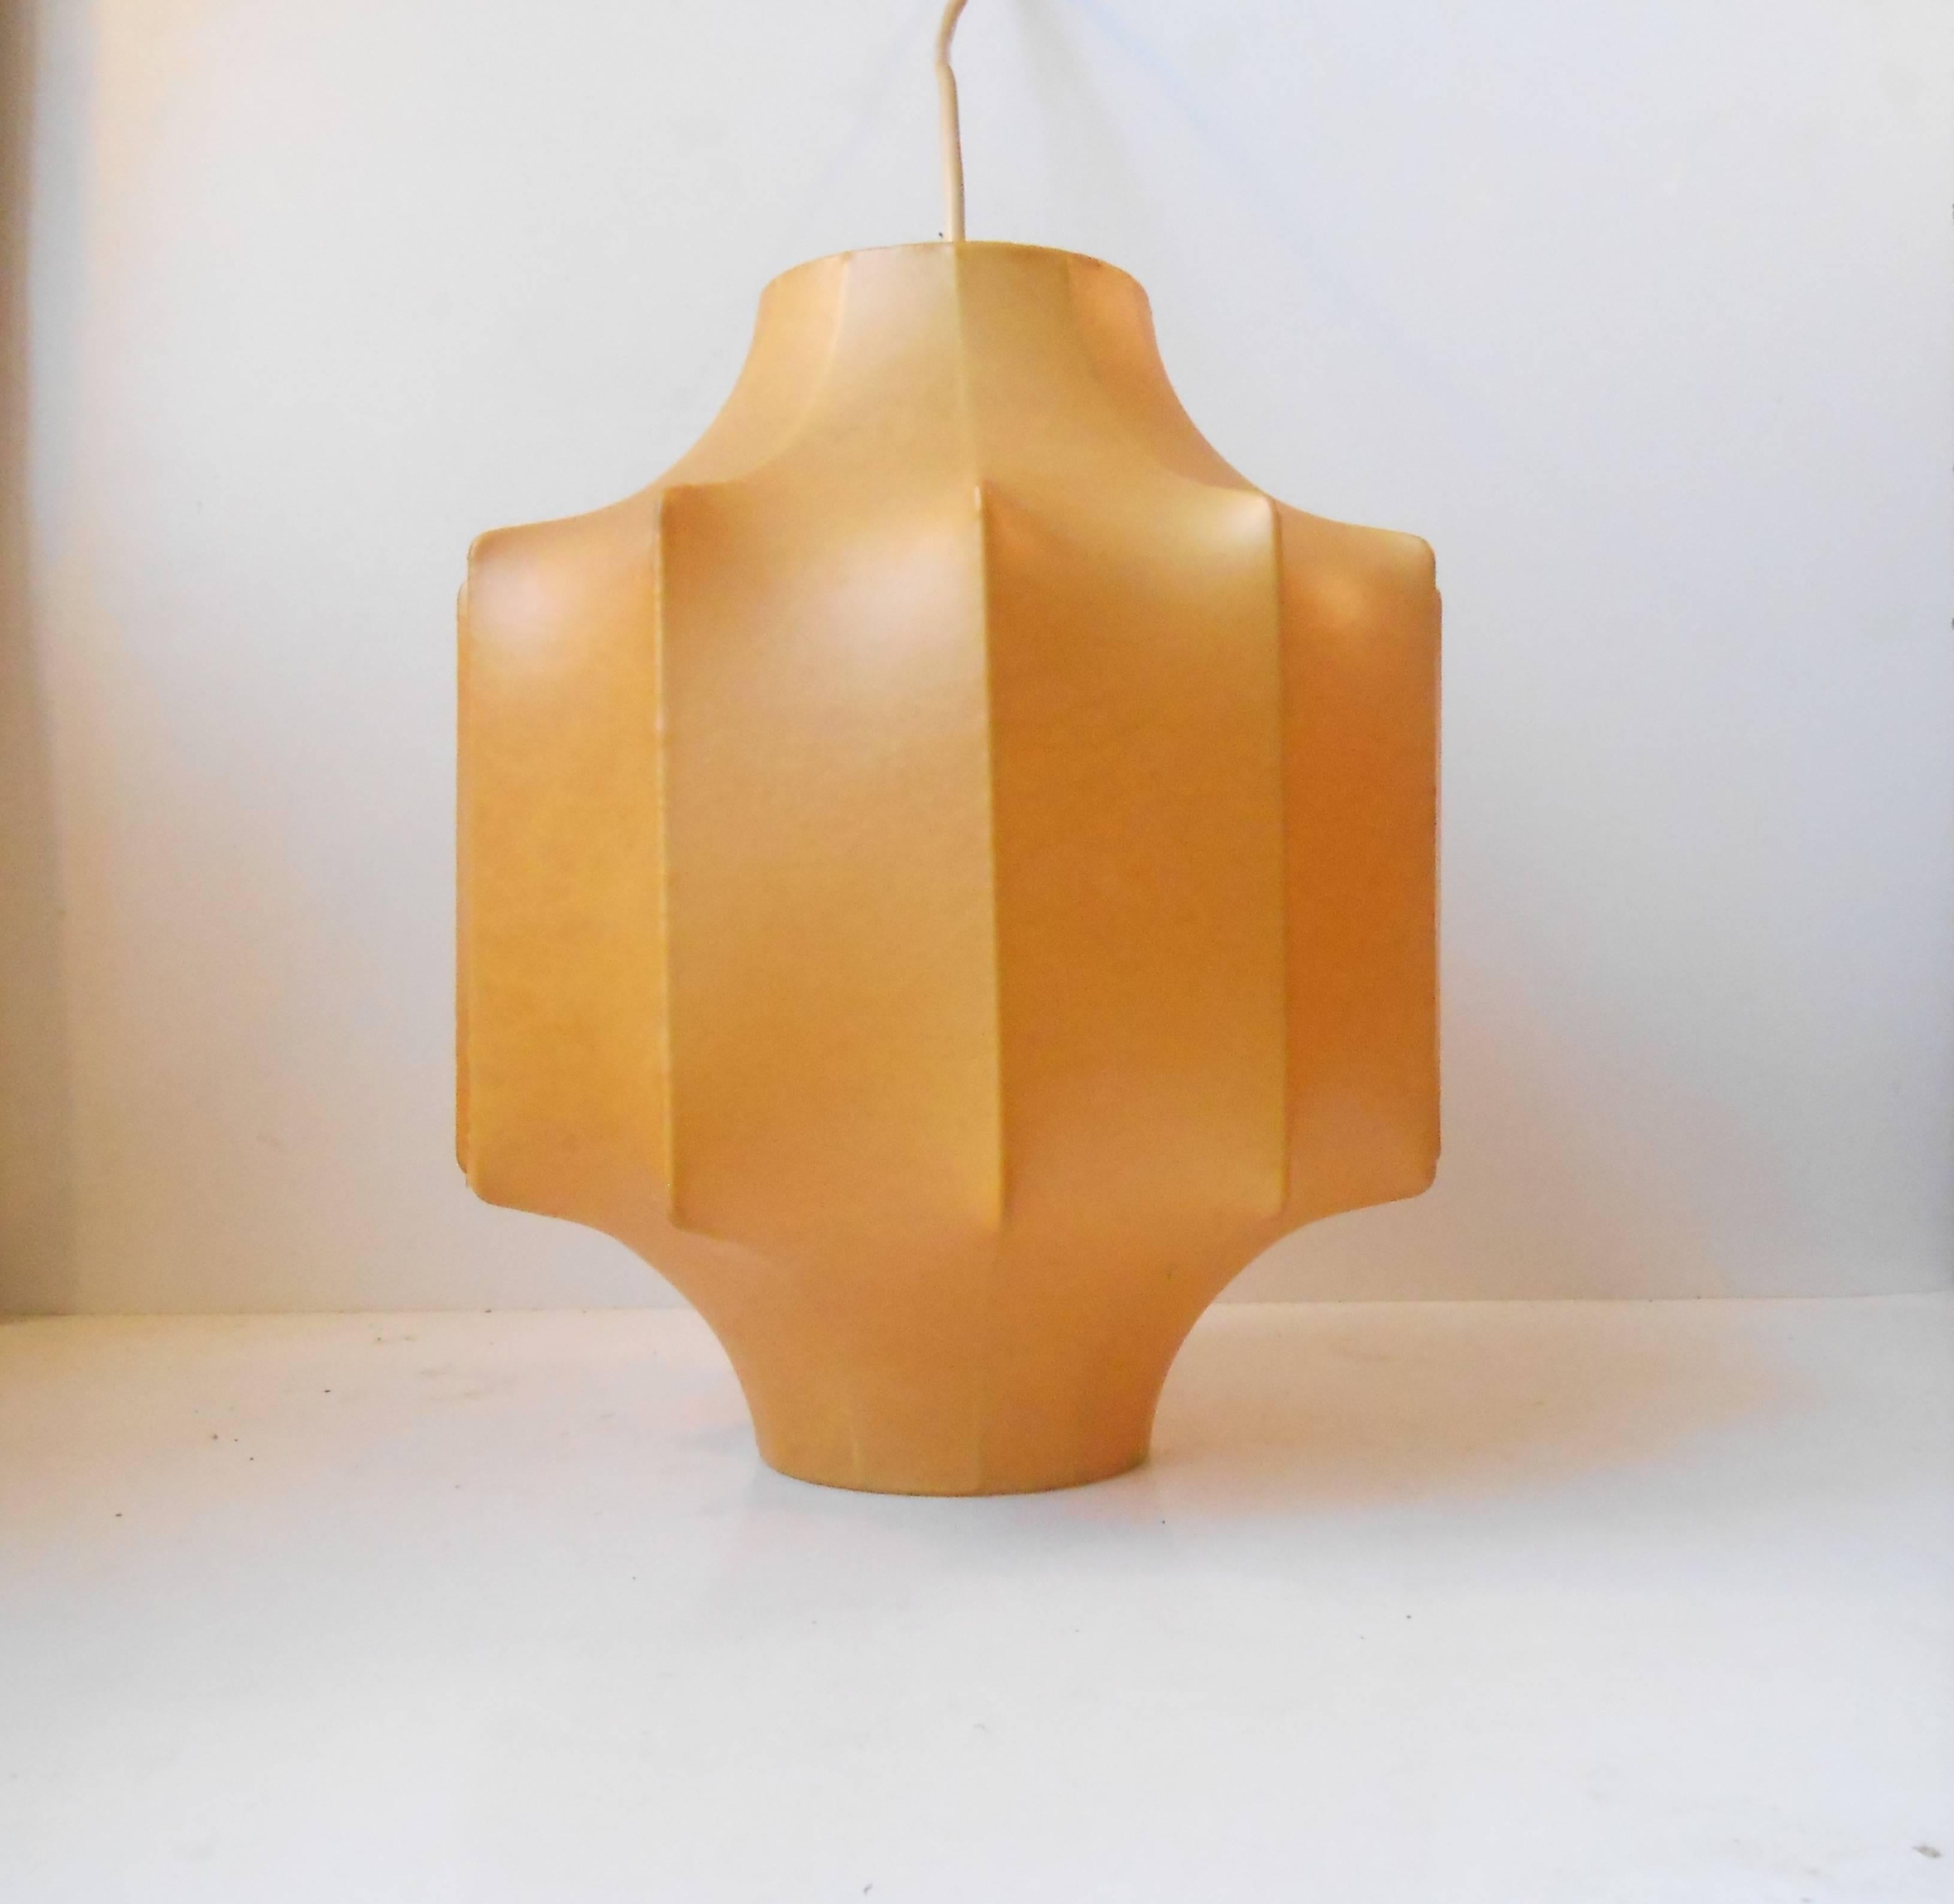 Rare Italian pendant lamp made of soft plastic coating applied on metal frame. An invention of Arturo Eisenkeil from Merano that manifested the Flos Lightning Company internationally.

Measurements: H: 12 inches (30 cm), D: 10 inches (25 cm). Once